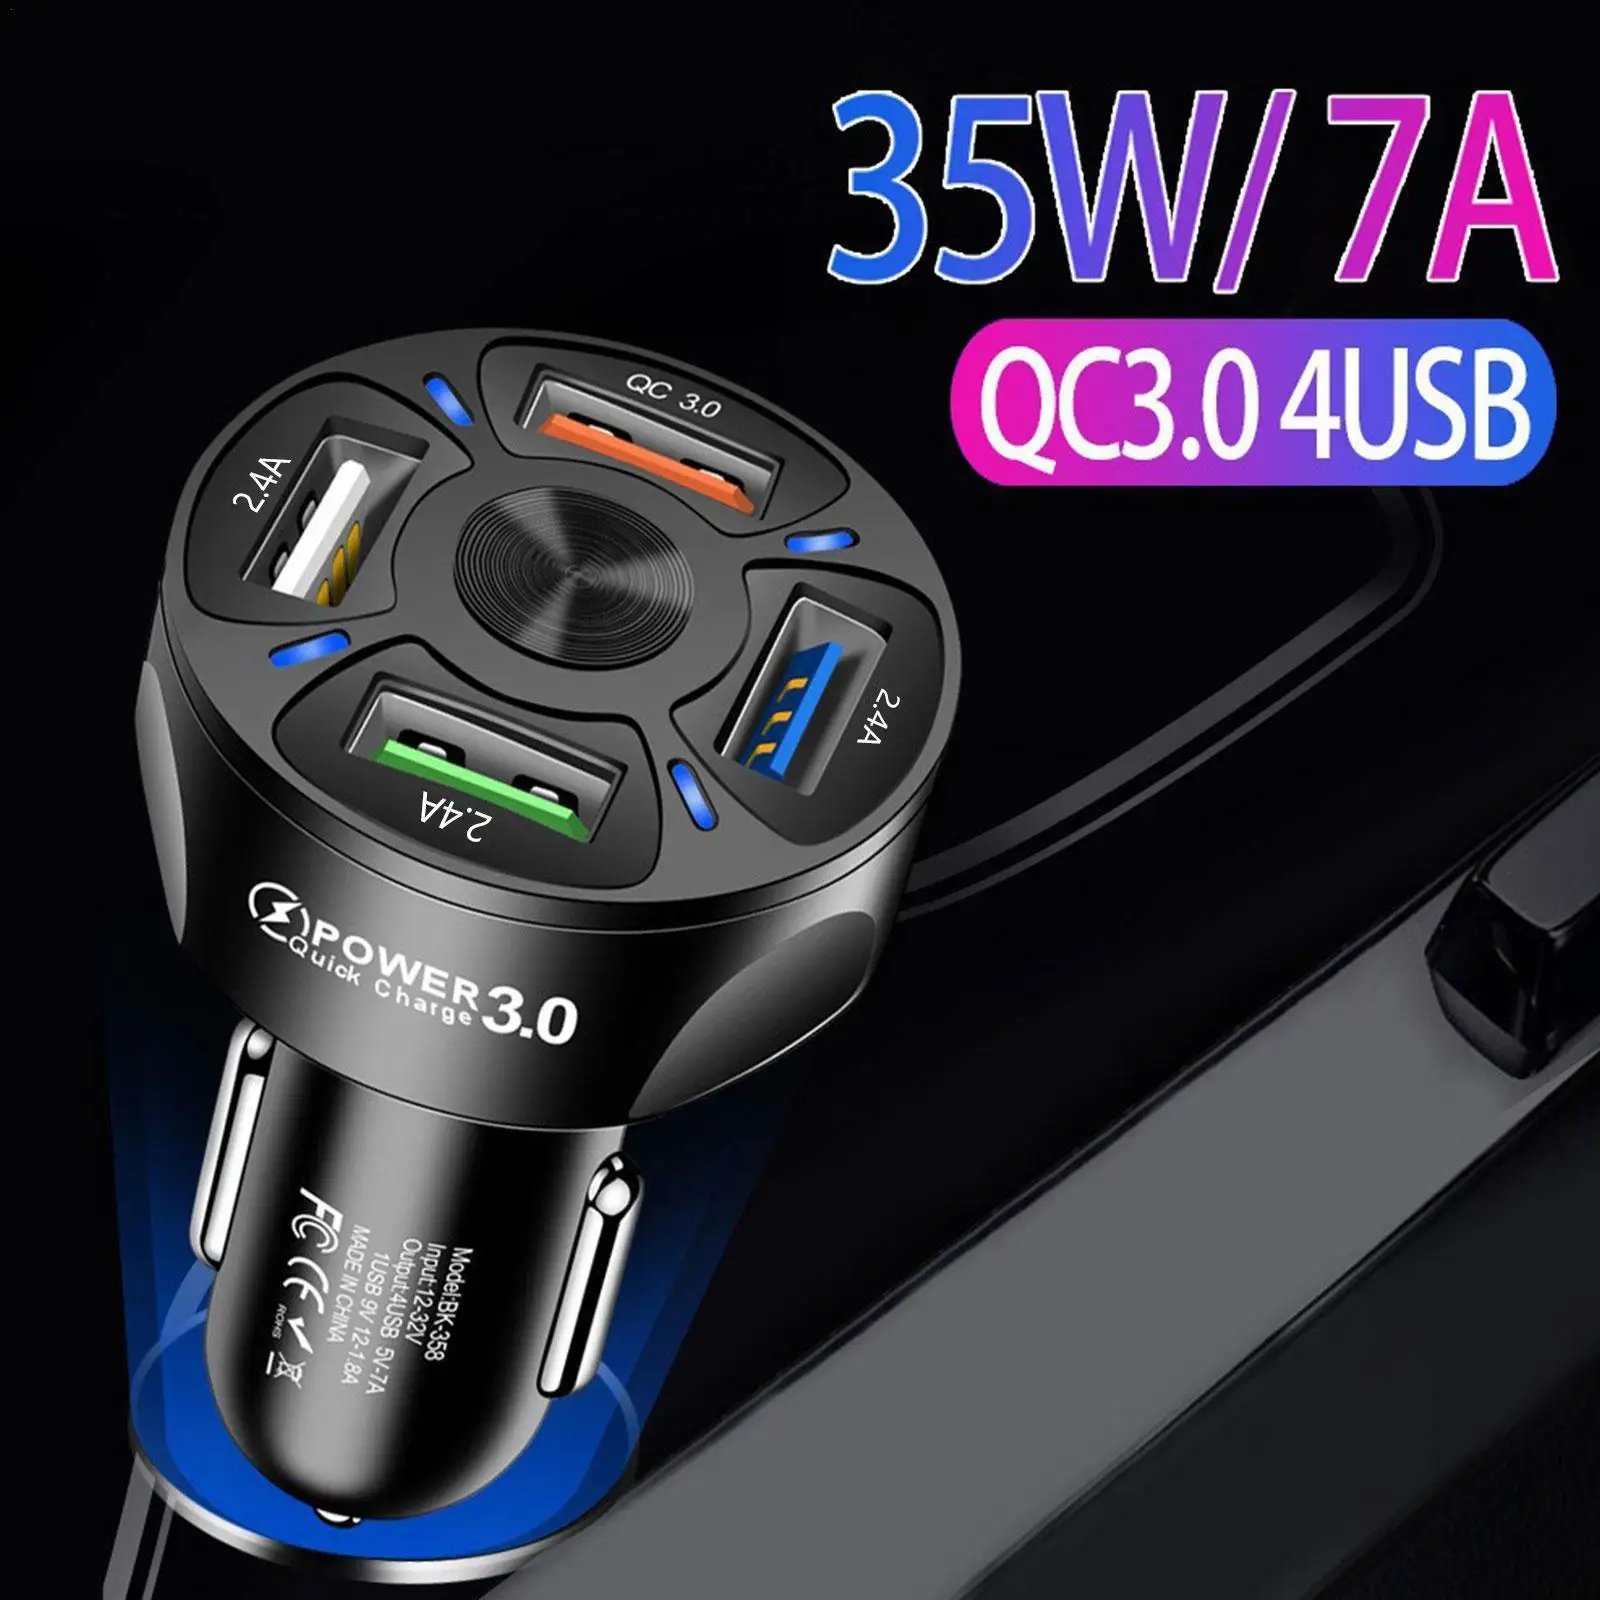 

Car Charger Quick Charge Cigarette Lighter Adapter 4 Ports USB QC 3.0 7A 35W USB Car Charger With LED For IPhone Samsung